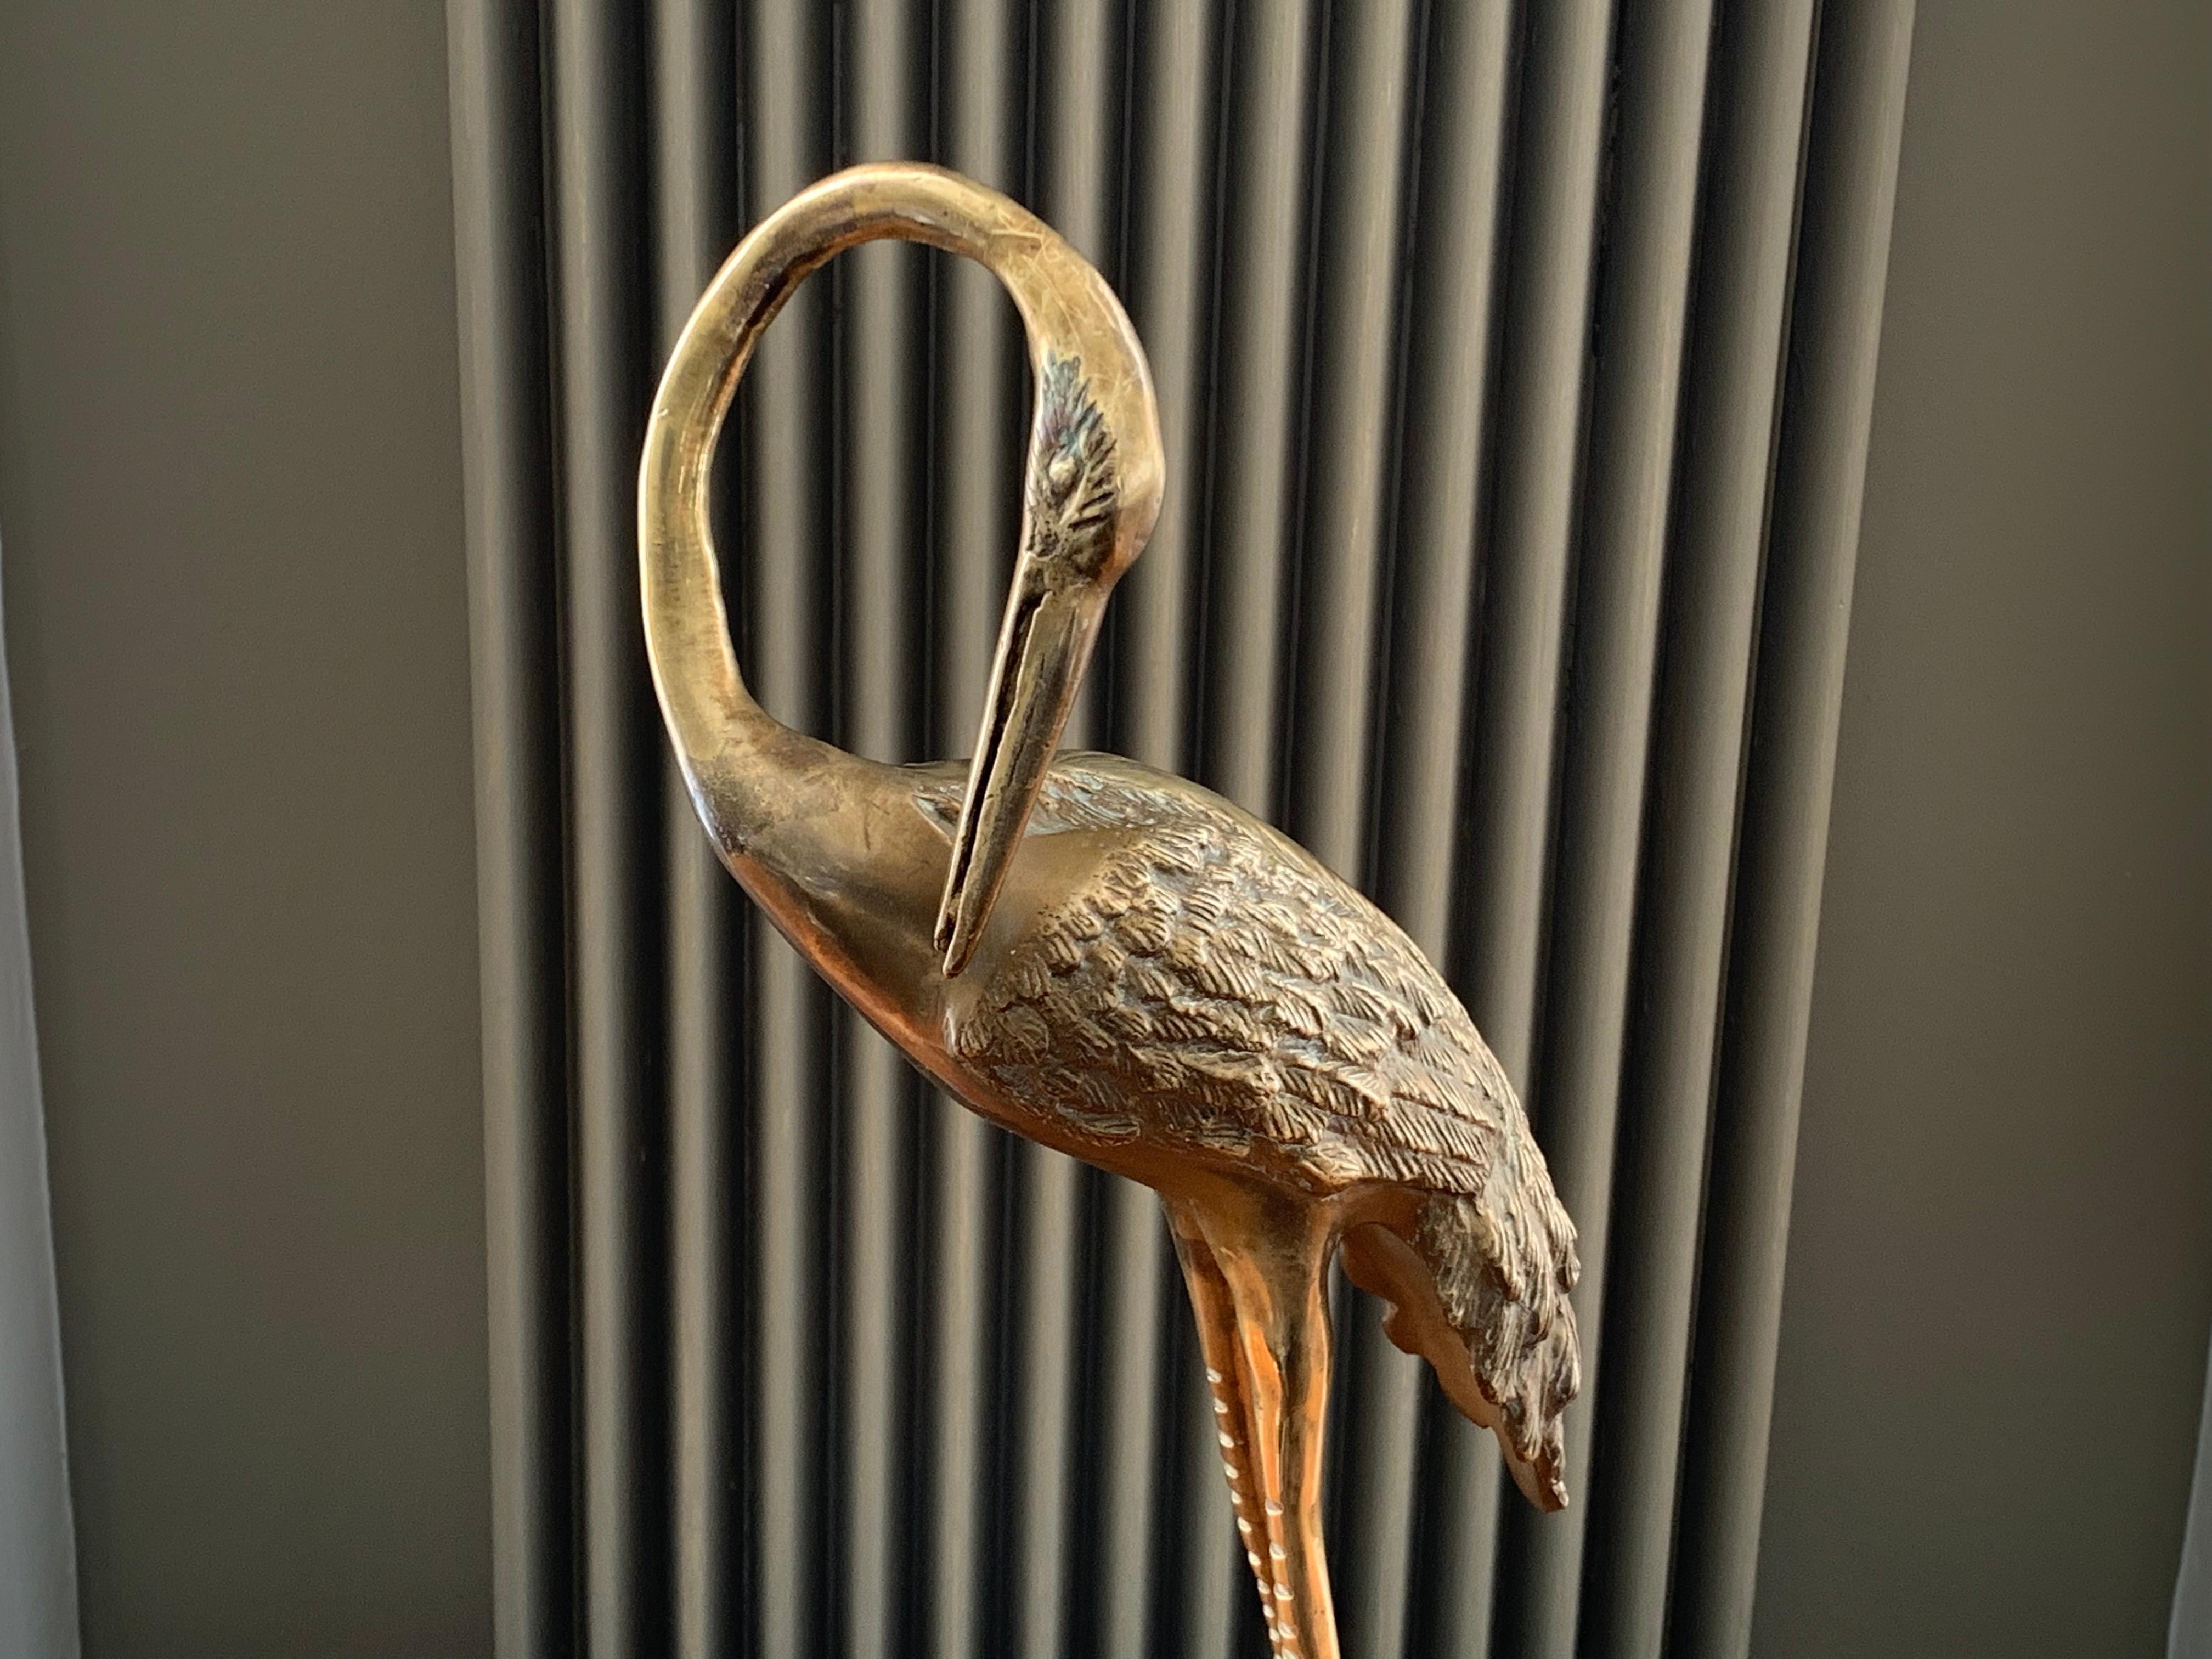 Vintage 1970s brass crane with a curved neck and sculpted plume of feathers. The crane is stood on a rectangular base to help keep it stable and upright. In excellent vintage condition with a deep, aged patina. An interesting and decorative piece